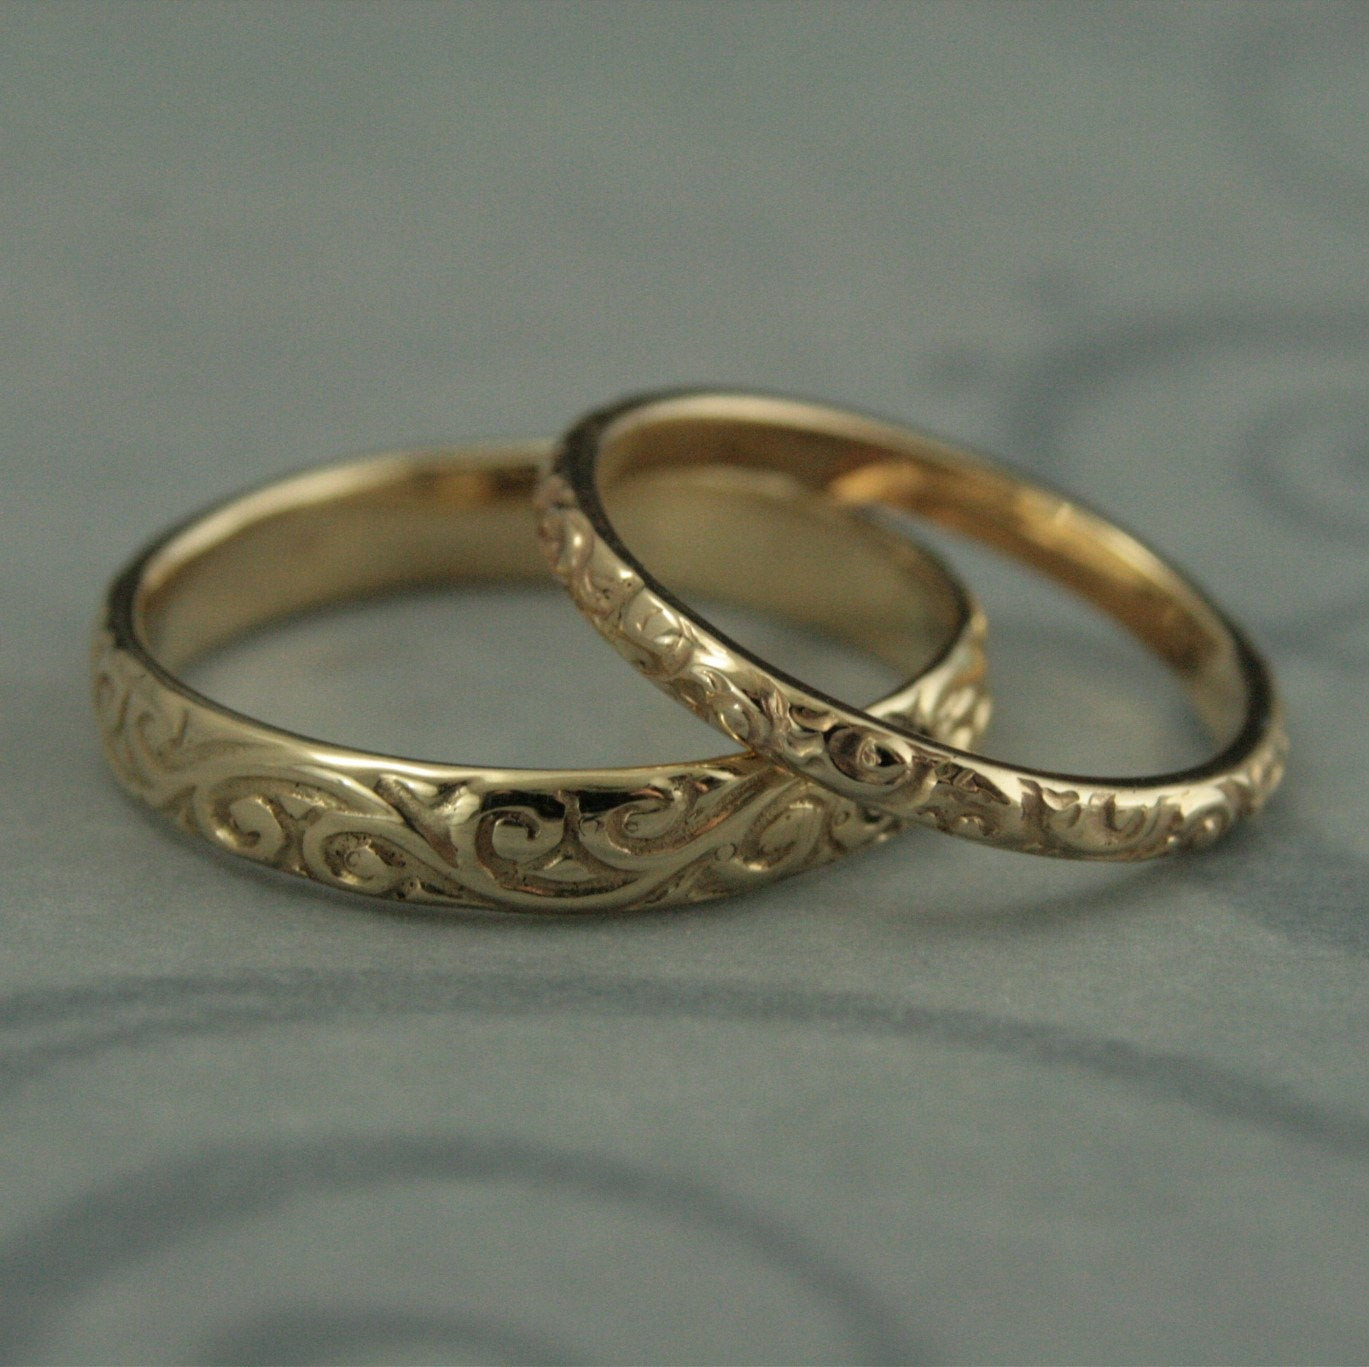 Old Fashioned Wedding Rings
 Patterned Wedding Band Set Vintage Style Wedding Rings His and